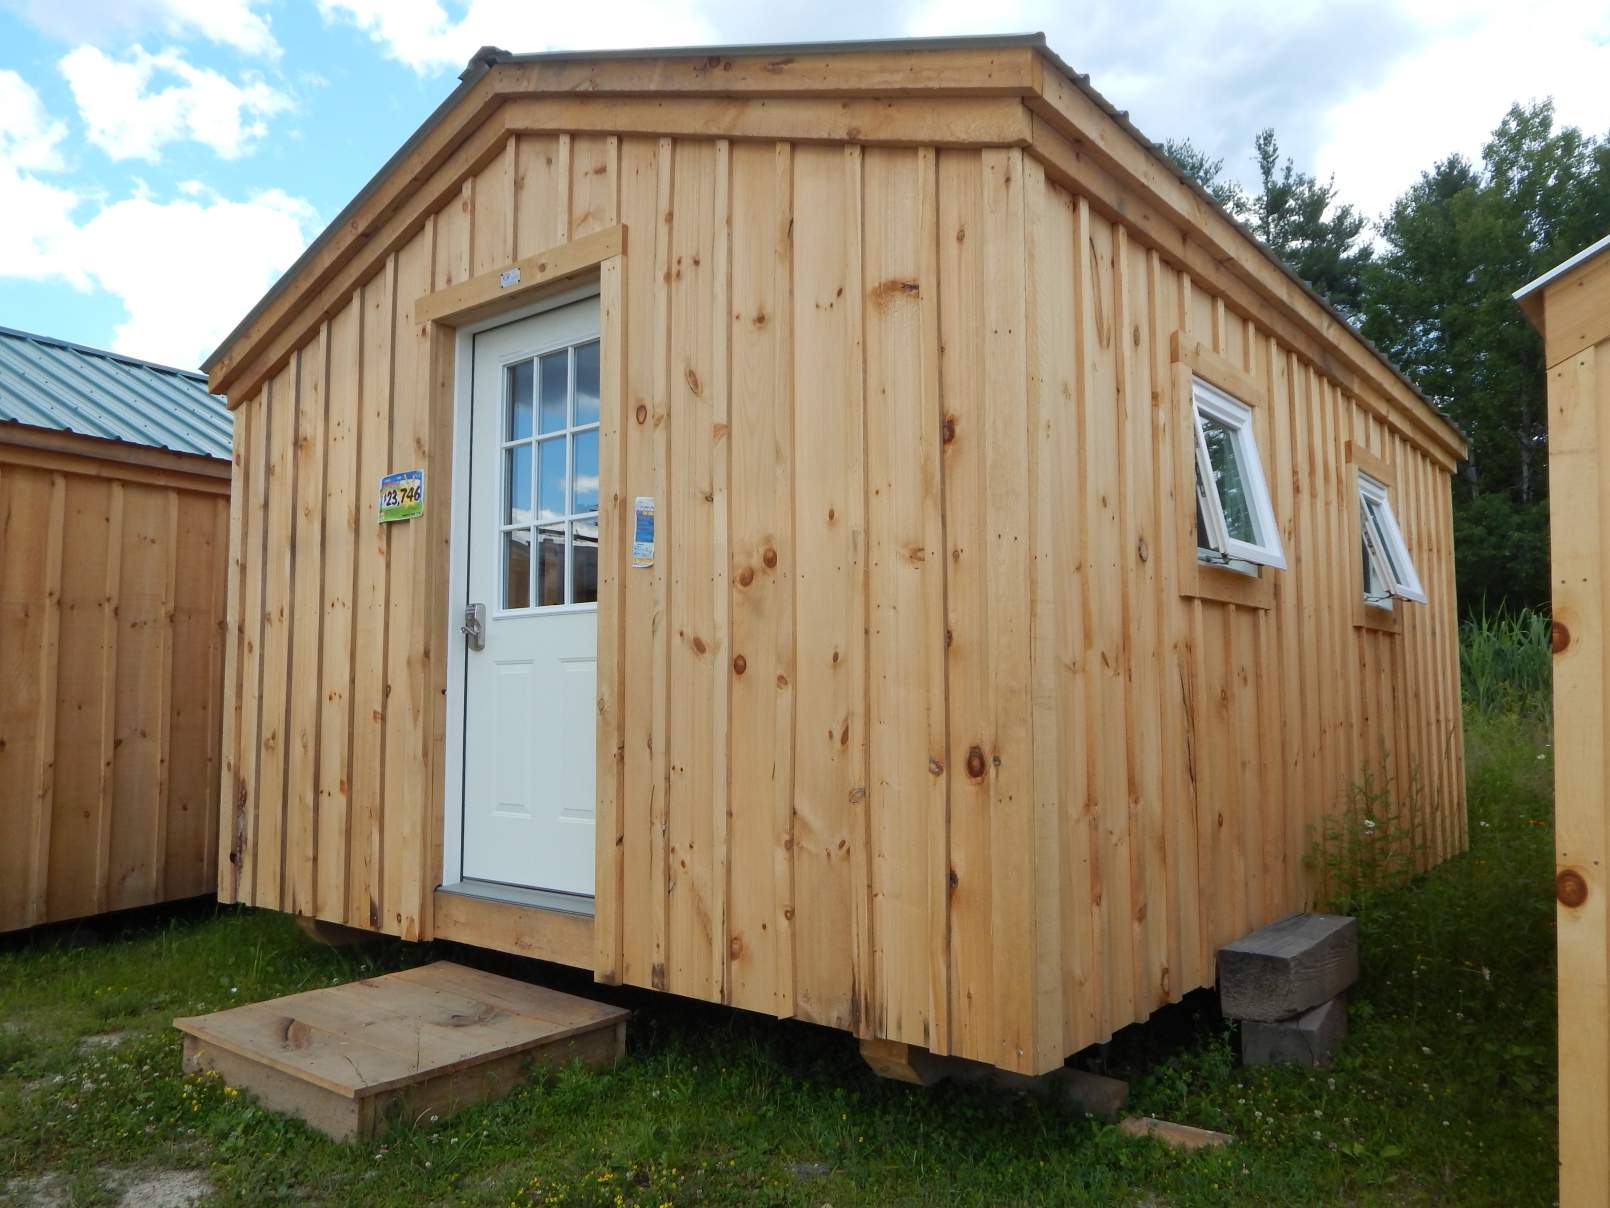 Small cabin with an insulated door and two awning windows